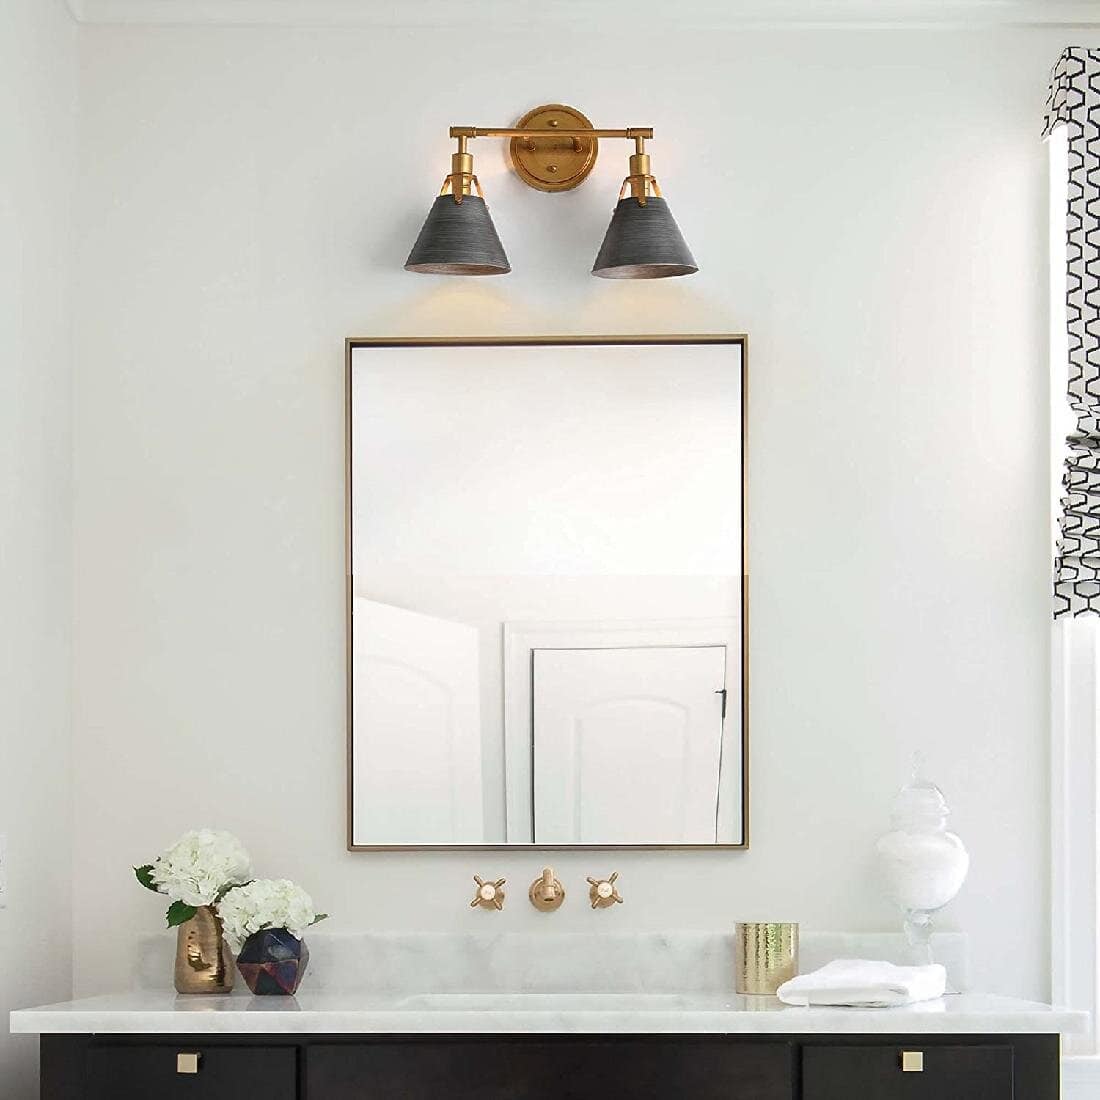 Get a Modern Farmhouse Look with this Two-Light Fixture